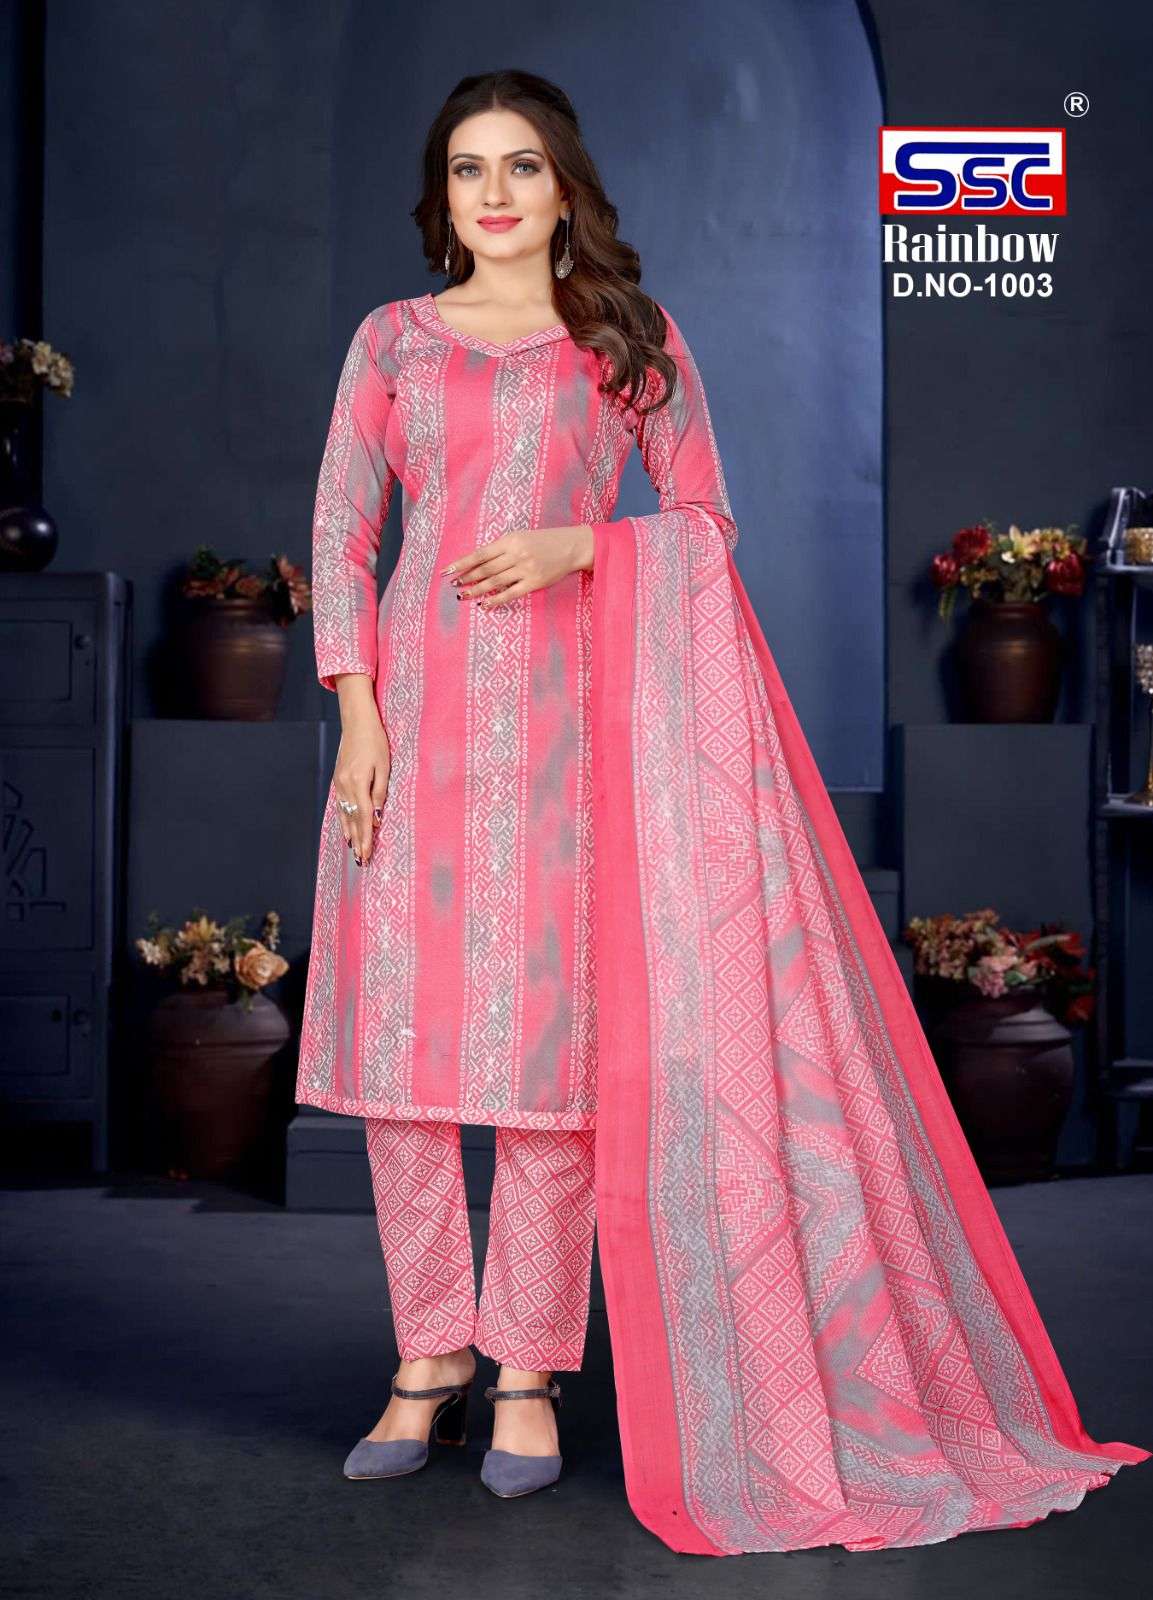 Rainbow By Shree Shanti Creation 1001 To 1012 Series Beautiful Suits Colorful Stylish Fancy Casual Wear & Ethnic Wear Soft Cotton Print Dresses At Wholesale Price